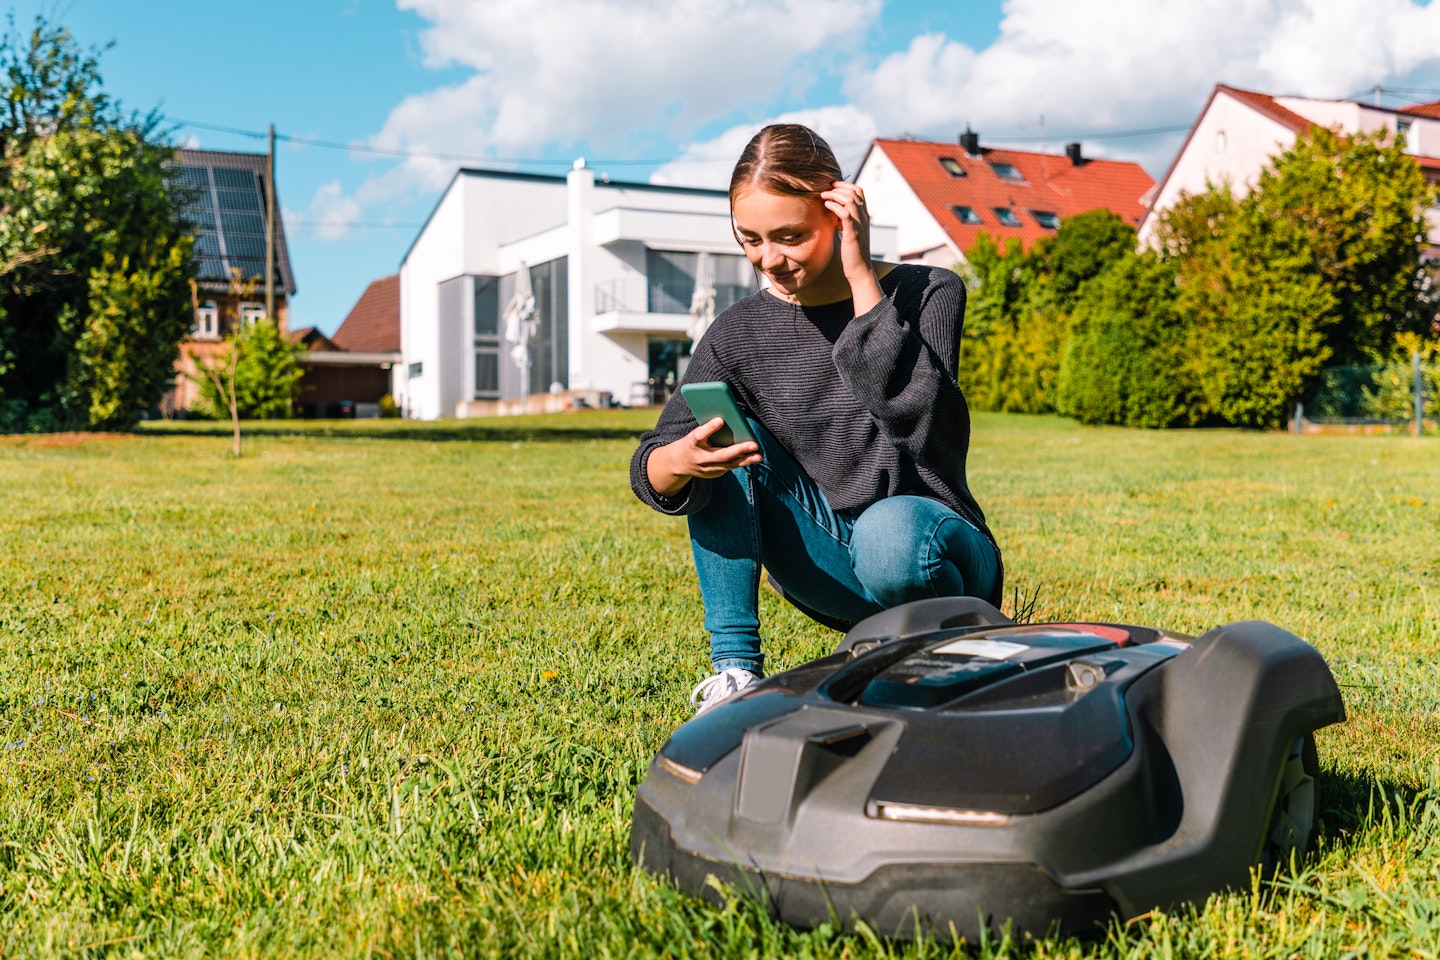 girl setting up robot lawnmower with smartphone